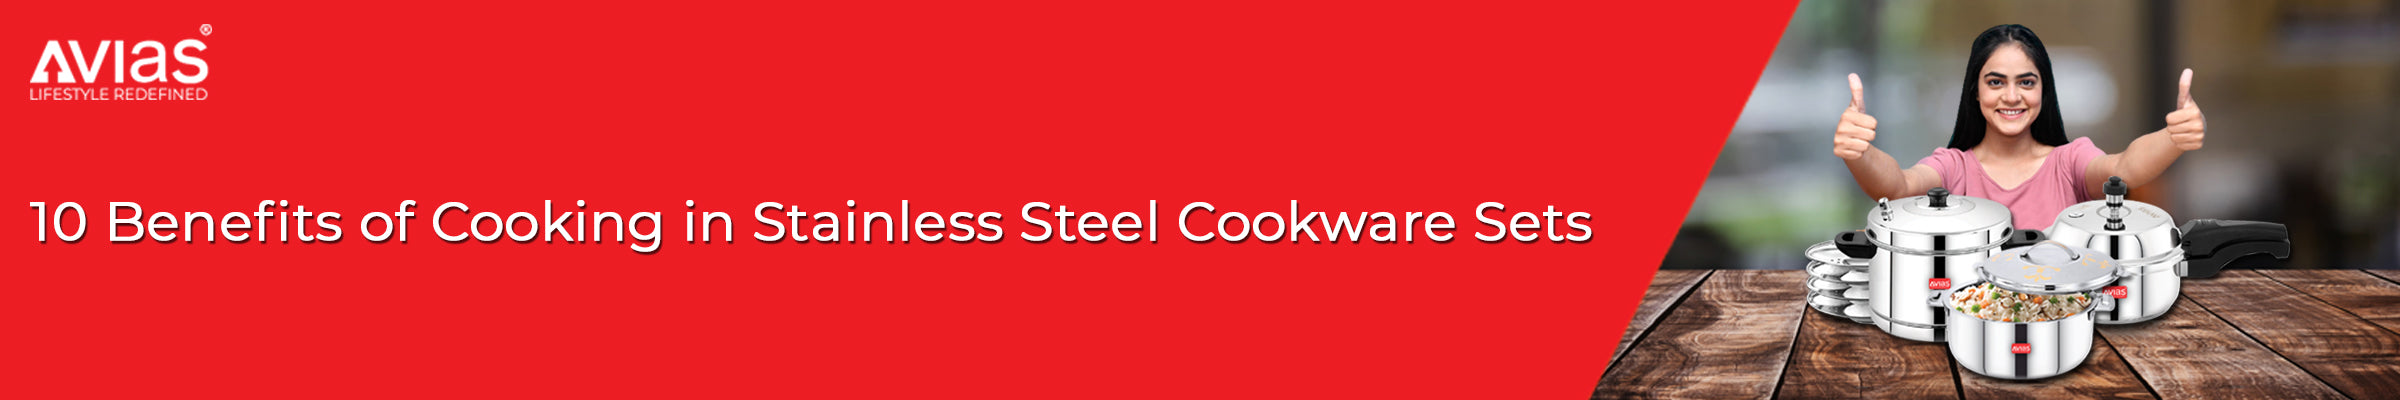 Top 10 Benefits Of Cooking With Stainless Steel Cookware from Avias